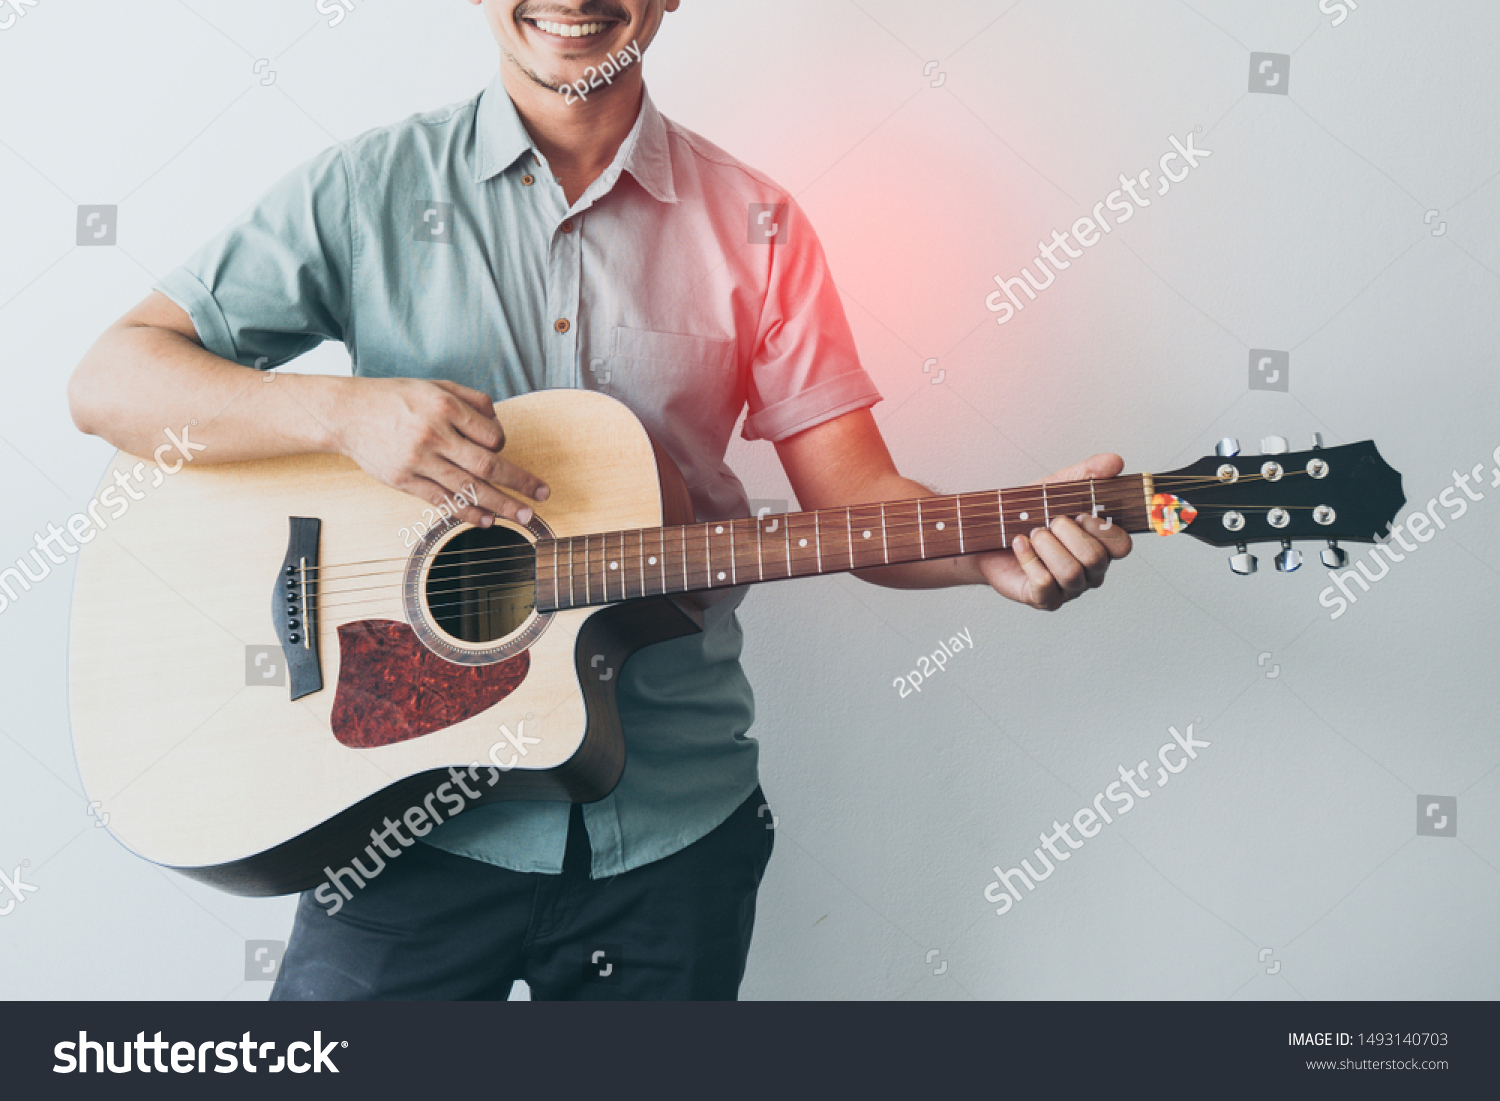 Cheerful guitarist. Cheerful handsome young man playing guitar and smiling while standing on white wall background, process color. #1493140703